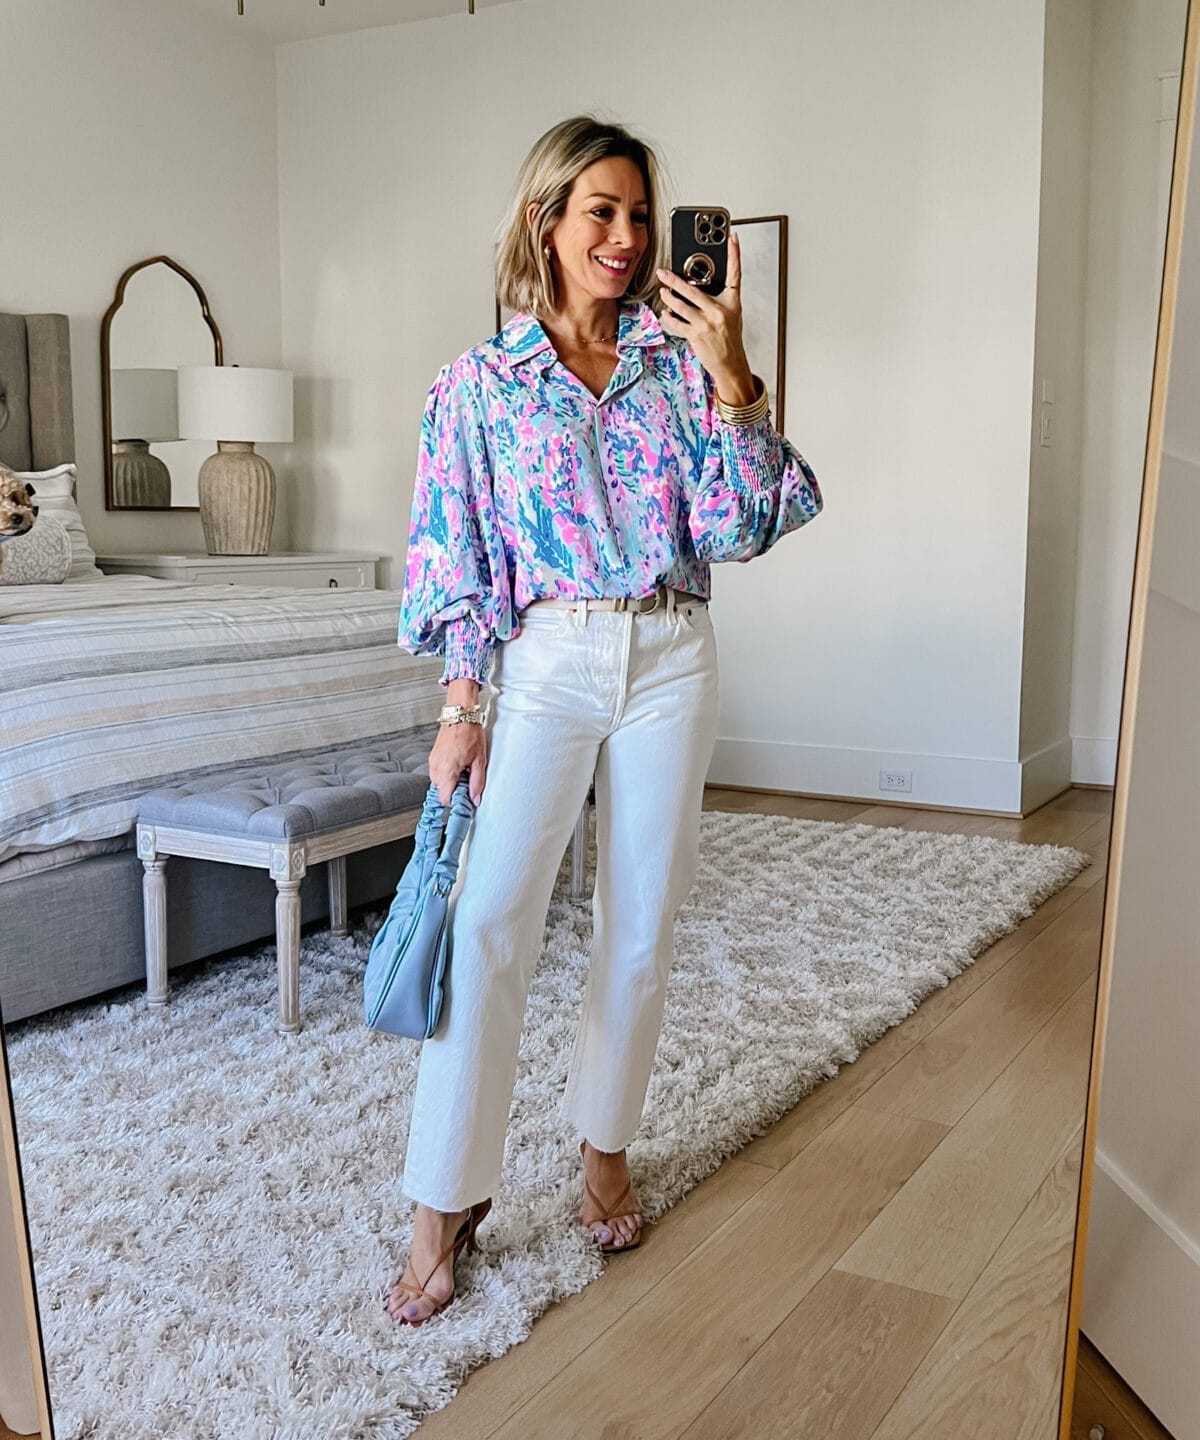 Lily Pulitzer style top, jeans, Sandals 